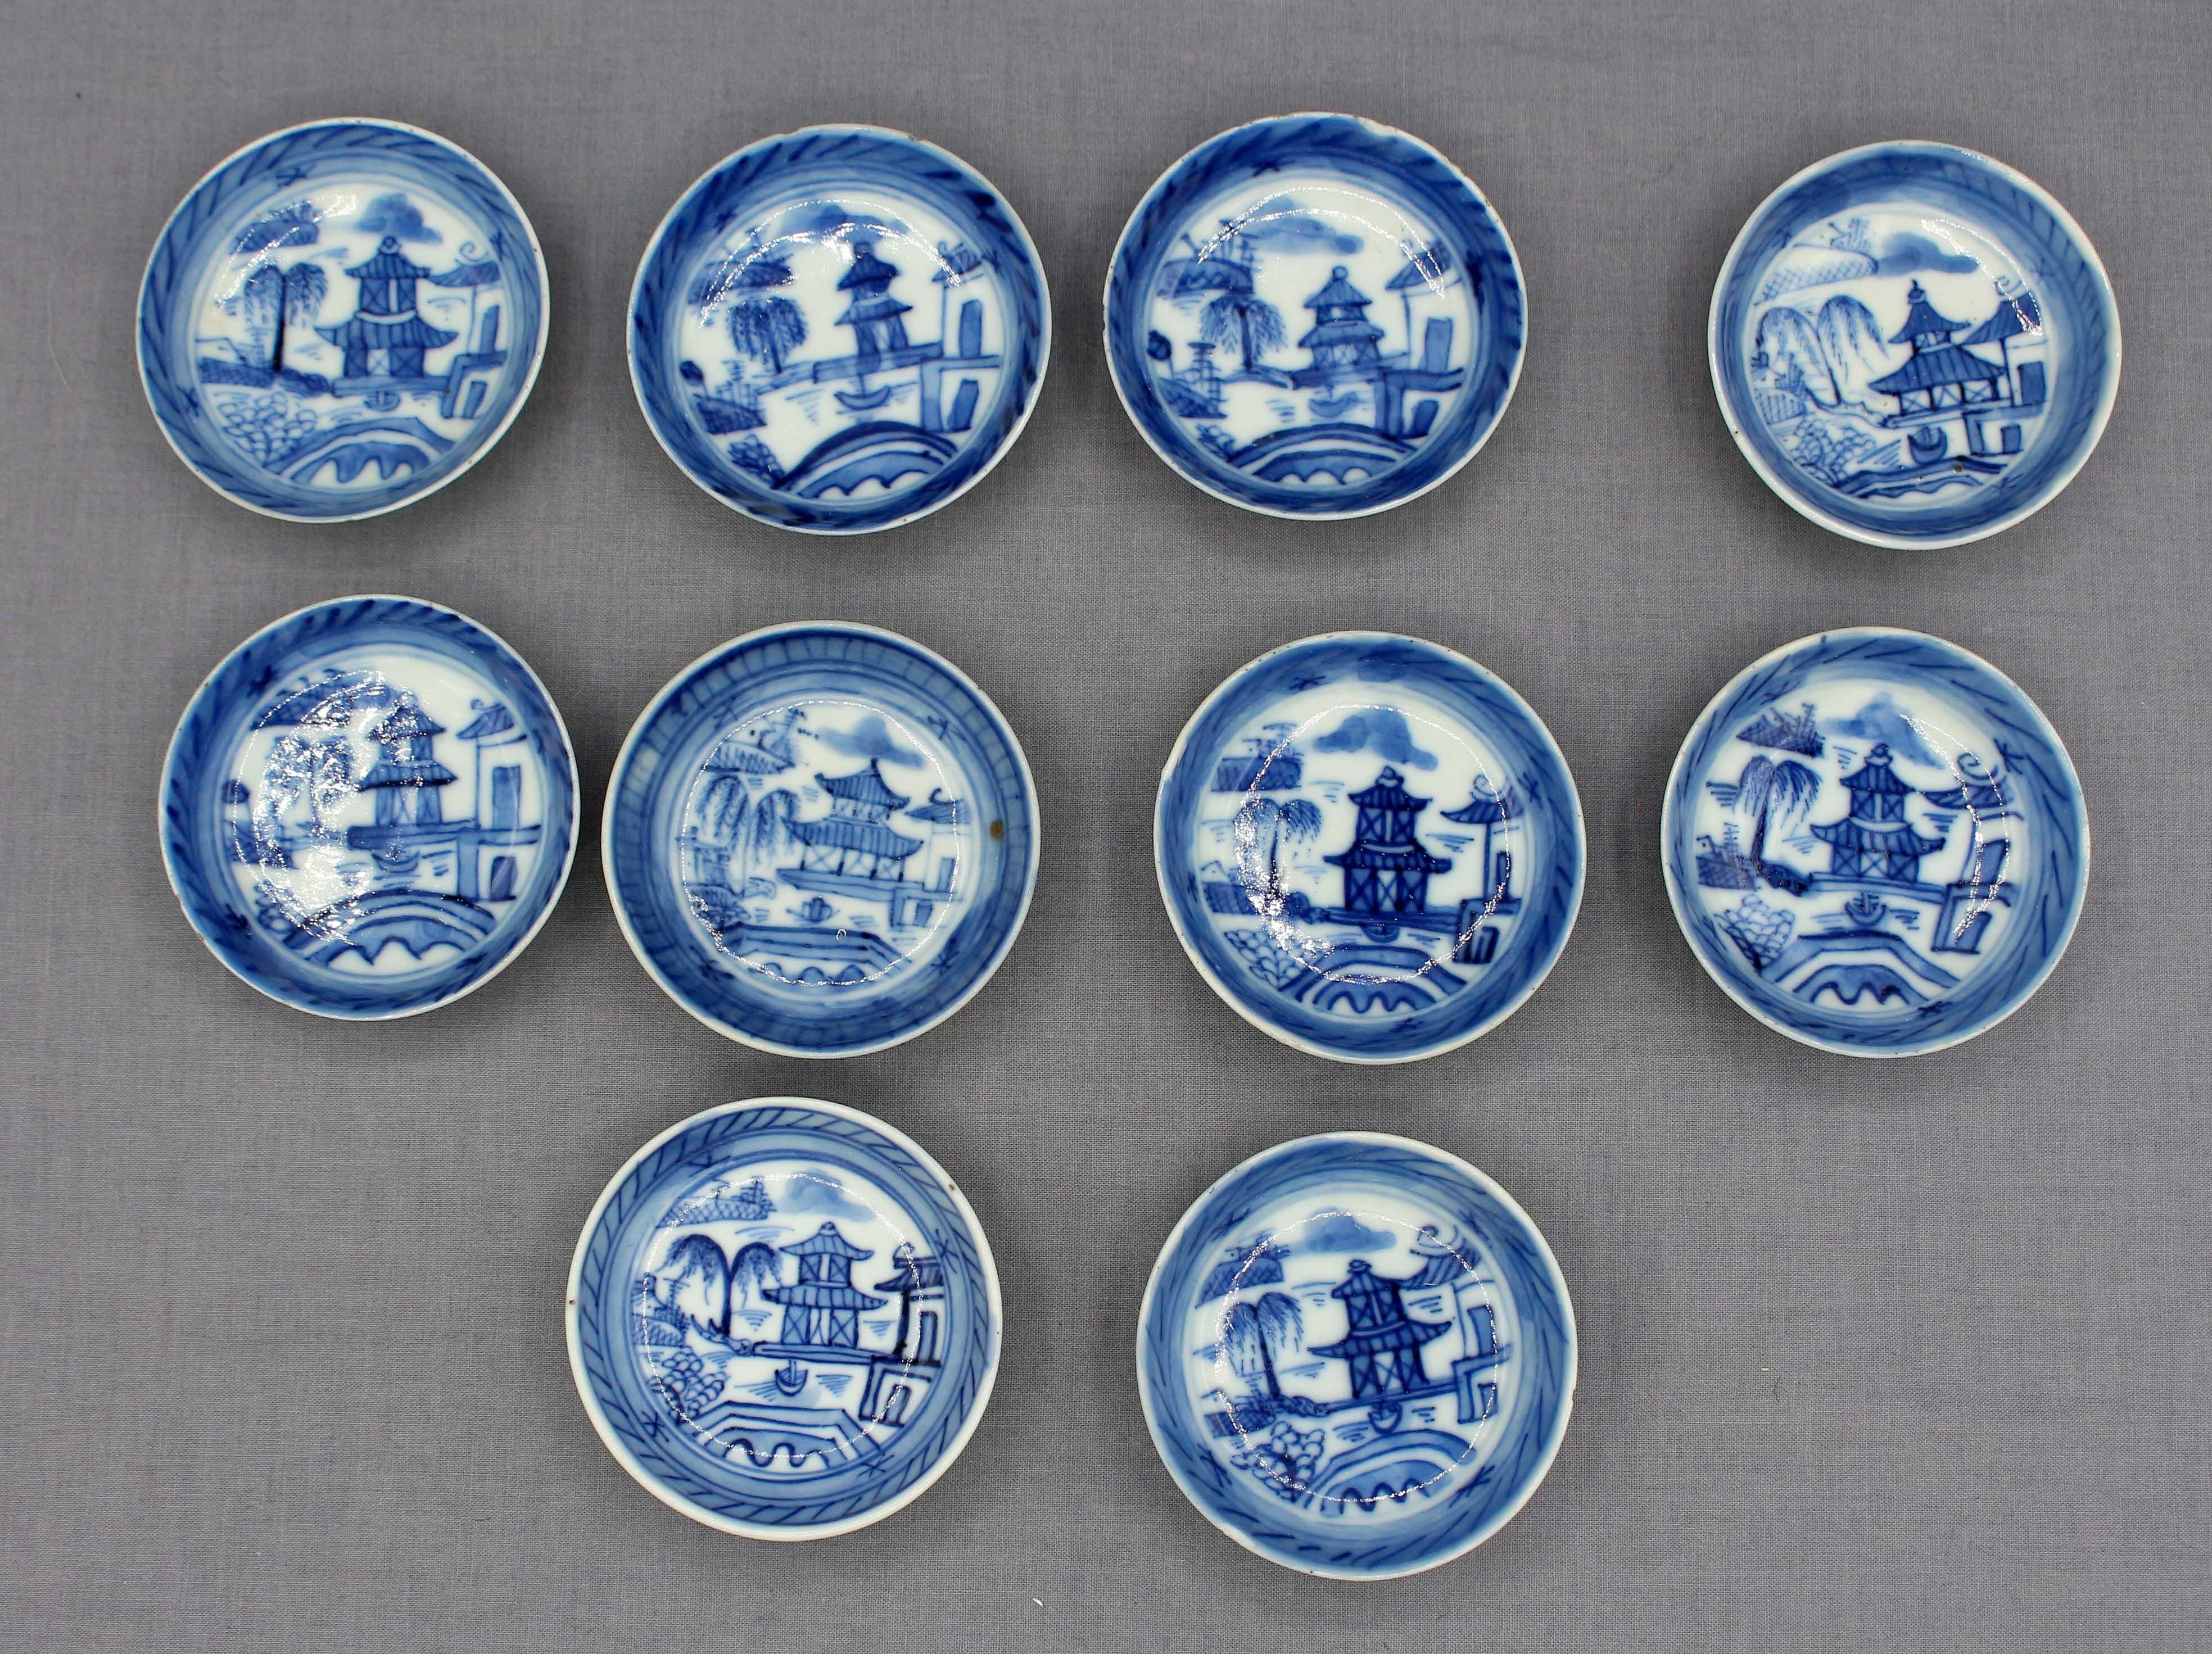 19th century assembled set of 10 porcelain salt dishes, Chinese export. Blue Canton, blue & white. Chips on a few.
2 3/4